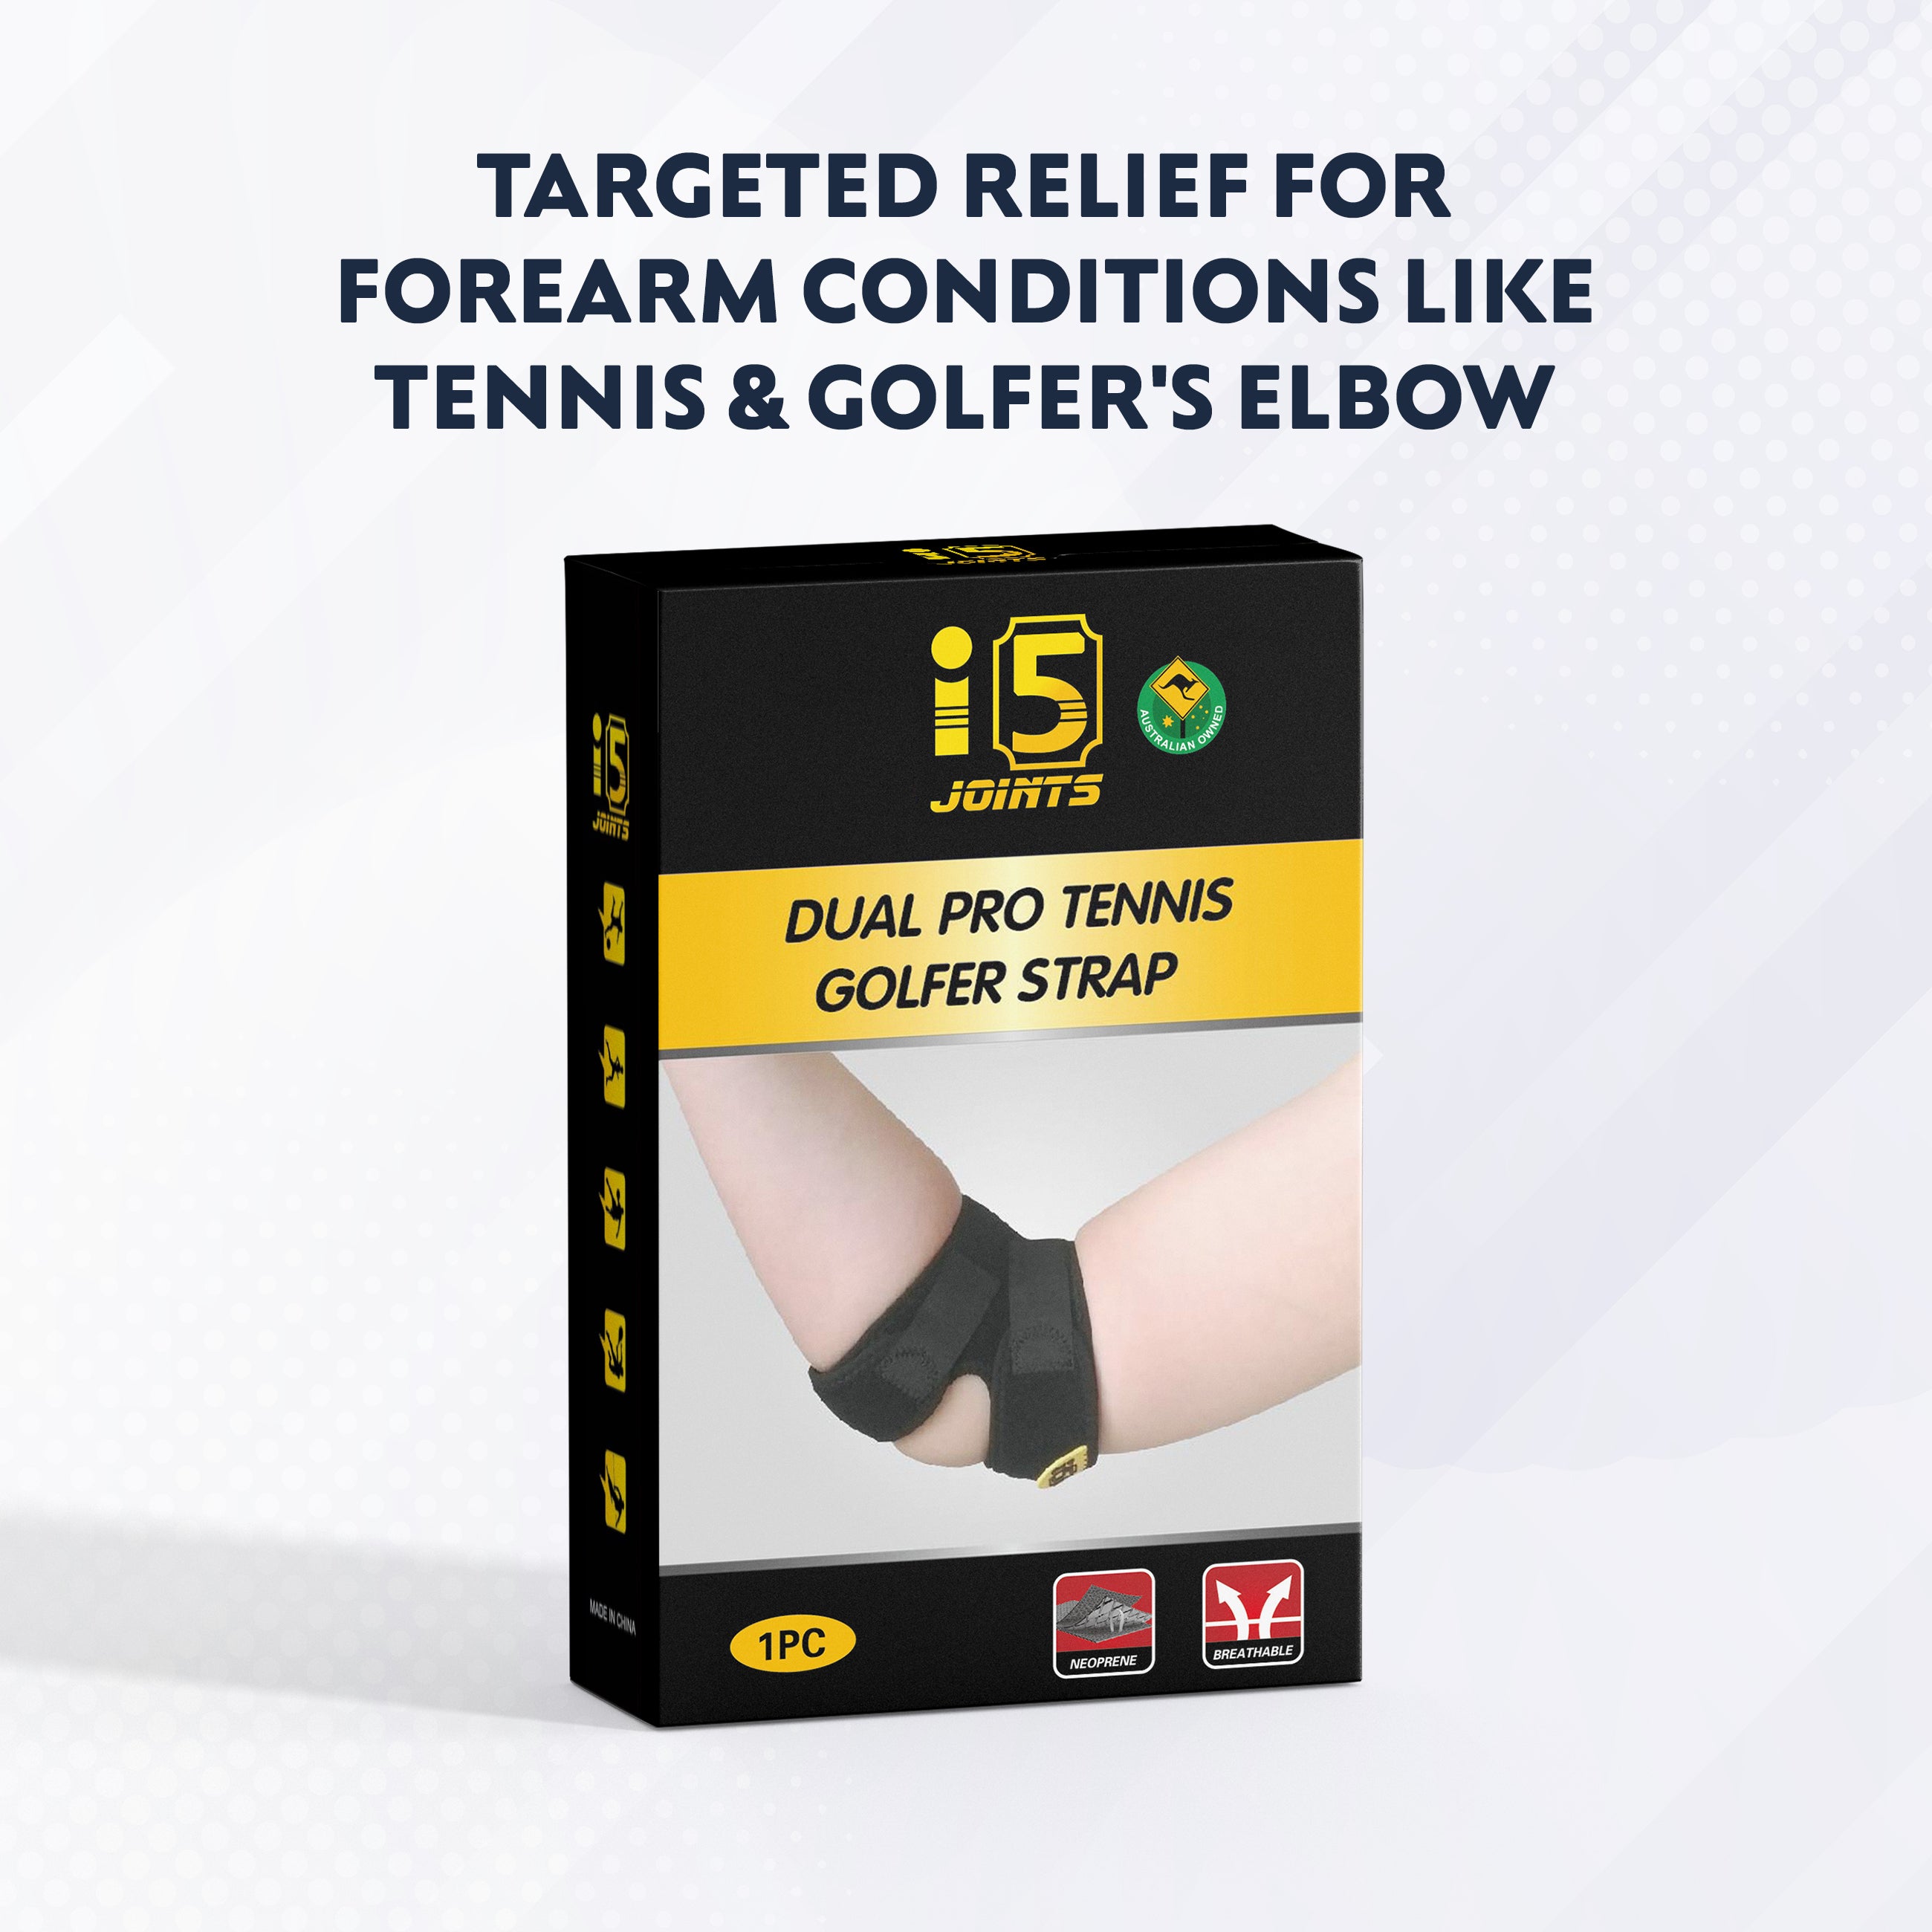 I5 –Dual Pro Tennis Golfer Hand Belt(Elbow Strap Specially desgined for Gym,Painfree,Elbow Strap removes discomfort,tagets the elbow problems))